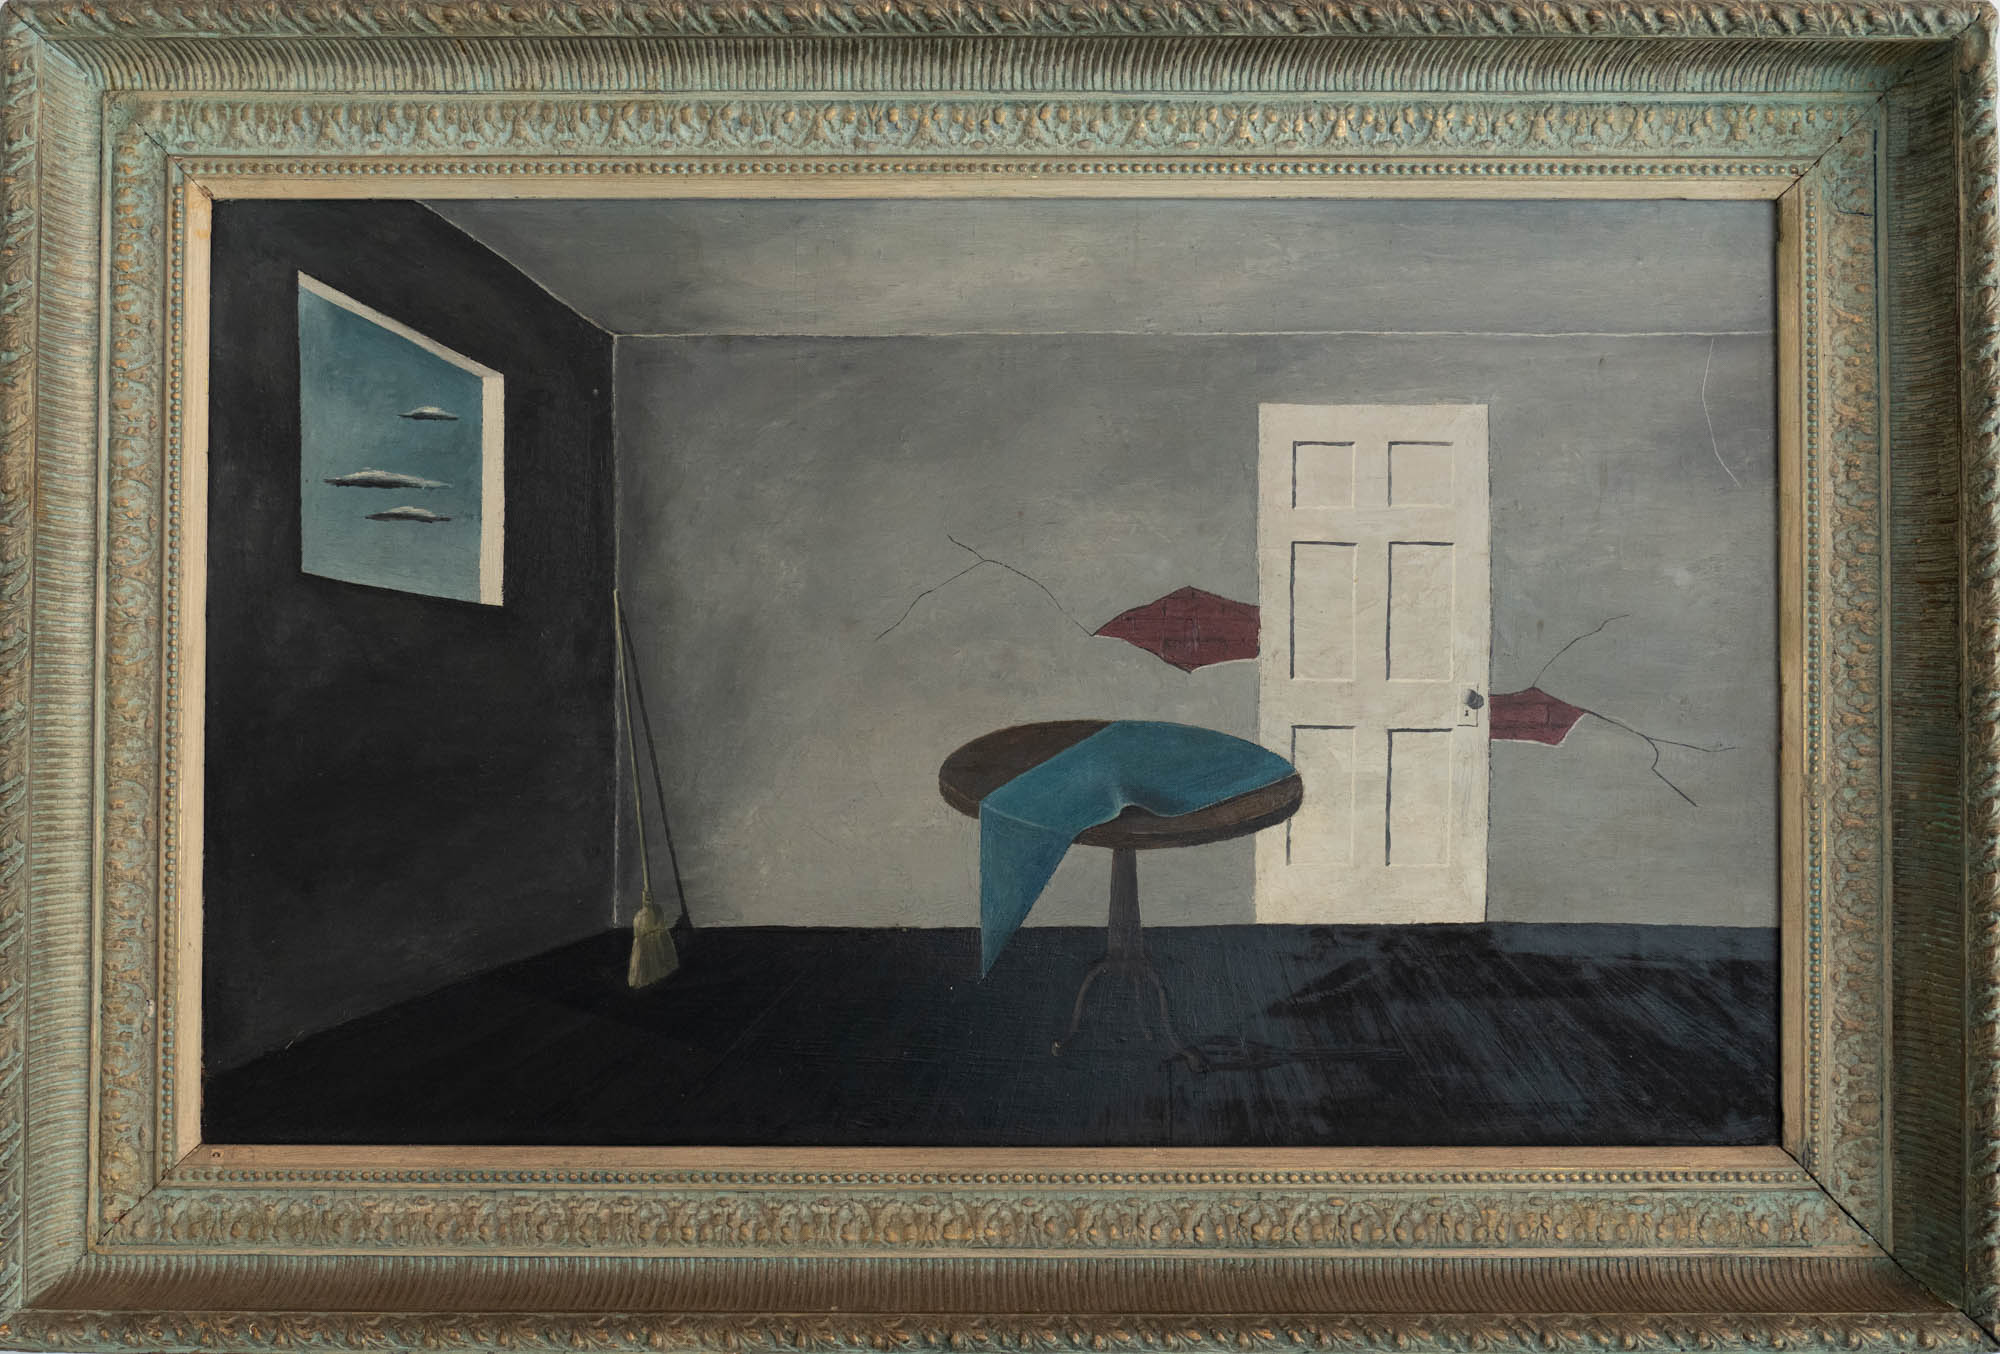 Oil painting of a table, broom, cloth, and door in an empty gray room with a single window looking onto a cloudy sky